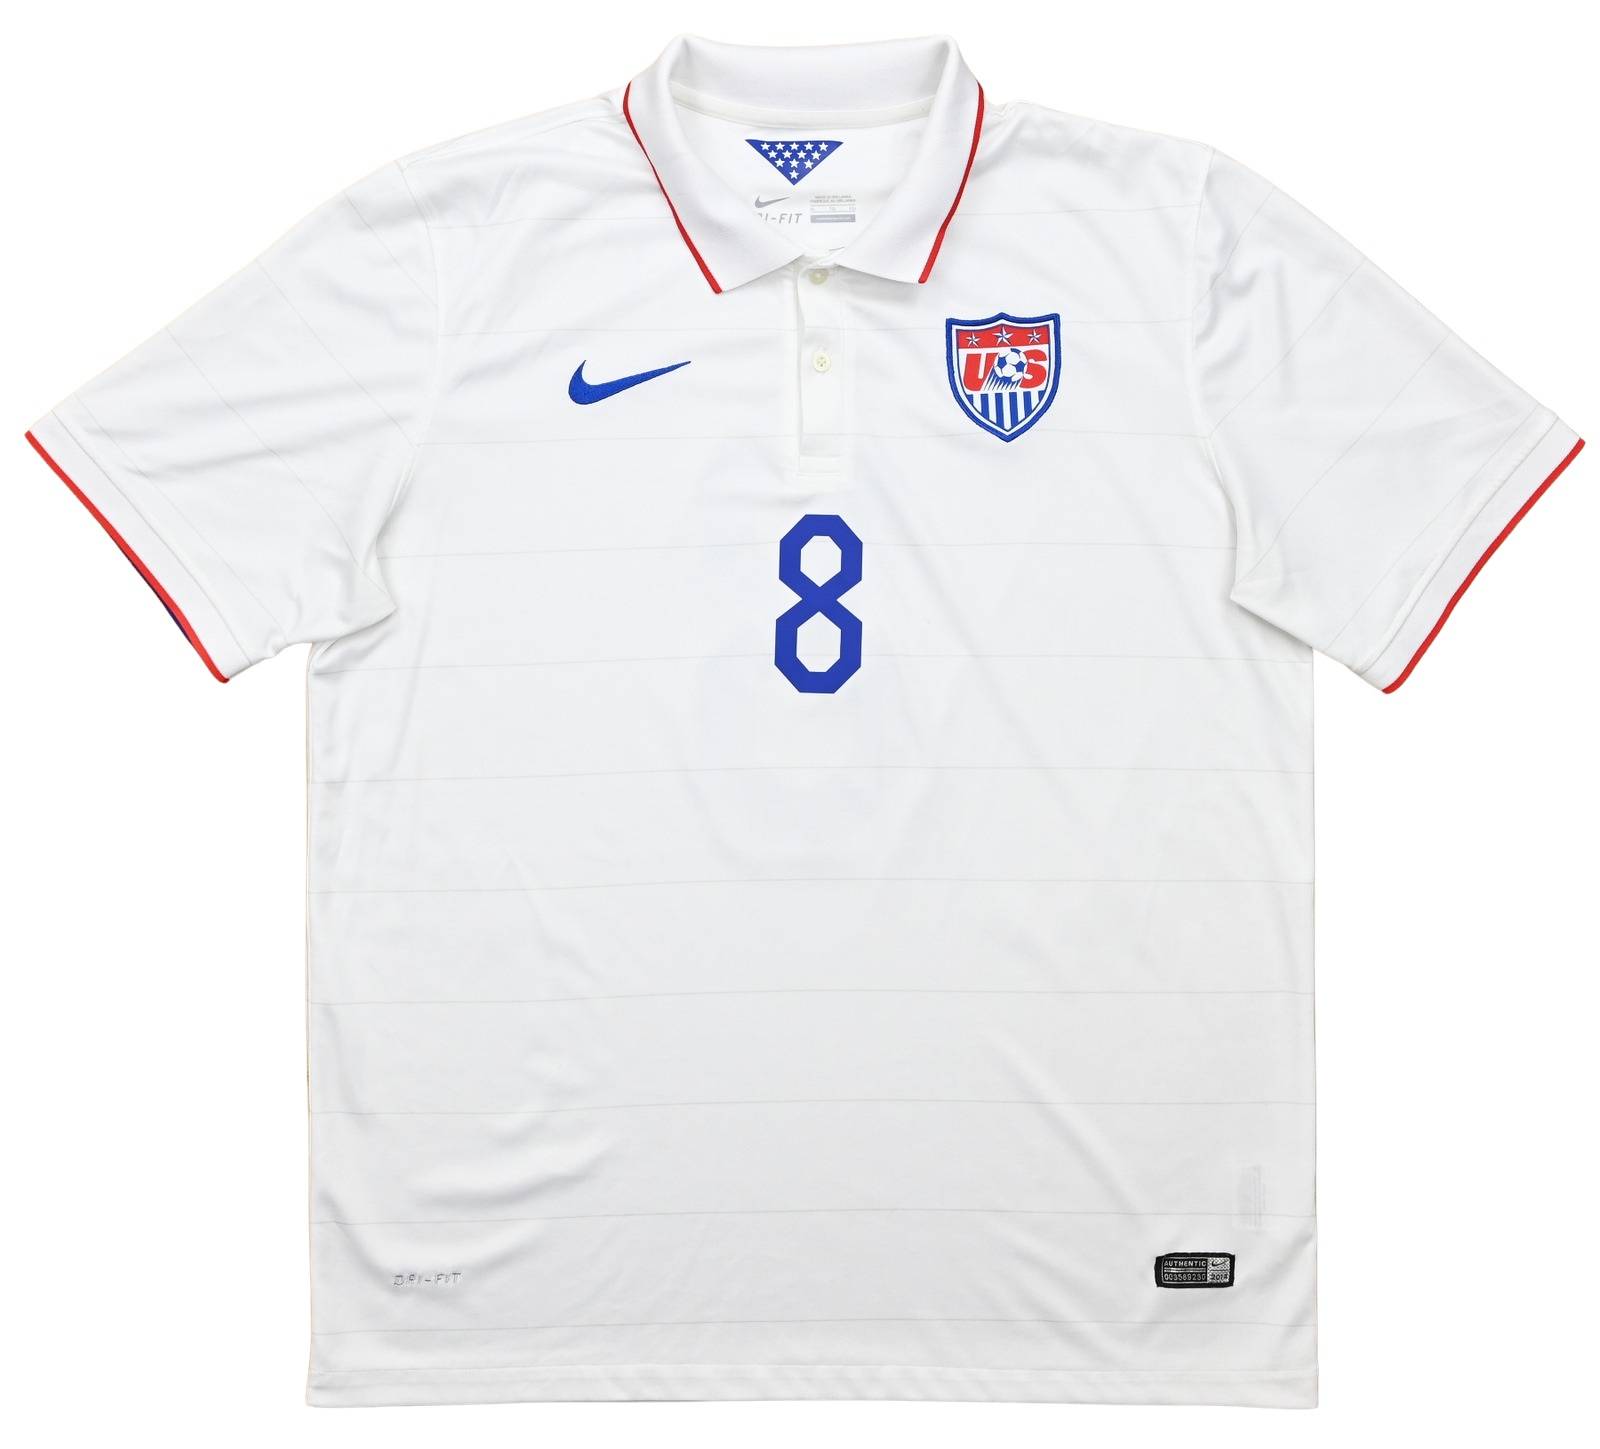 Buy Official 2022-2023 USA United States Home Shirt (DEMPSEY 8)